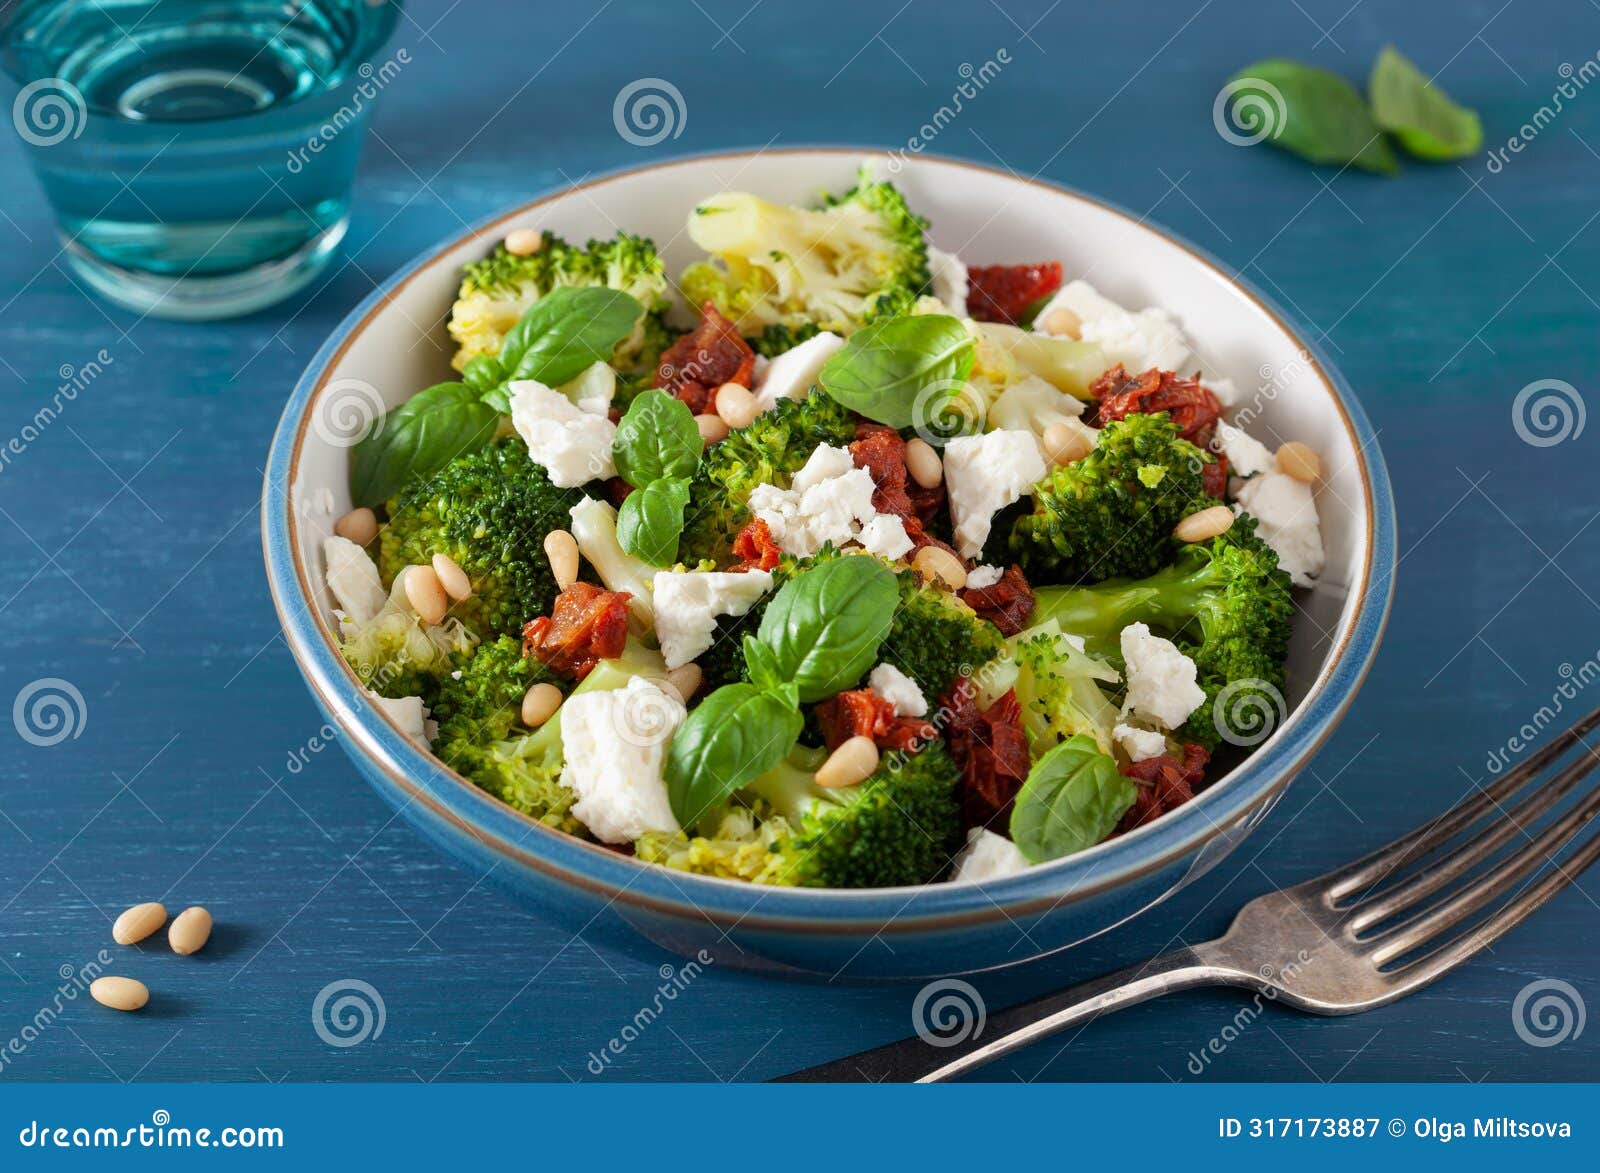 healthy broccoli salad with feta cheese sun dried tomatoes pine nuts.. vegetarian low carb keto diet